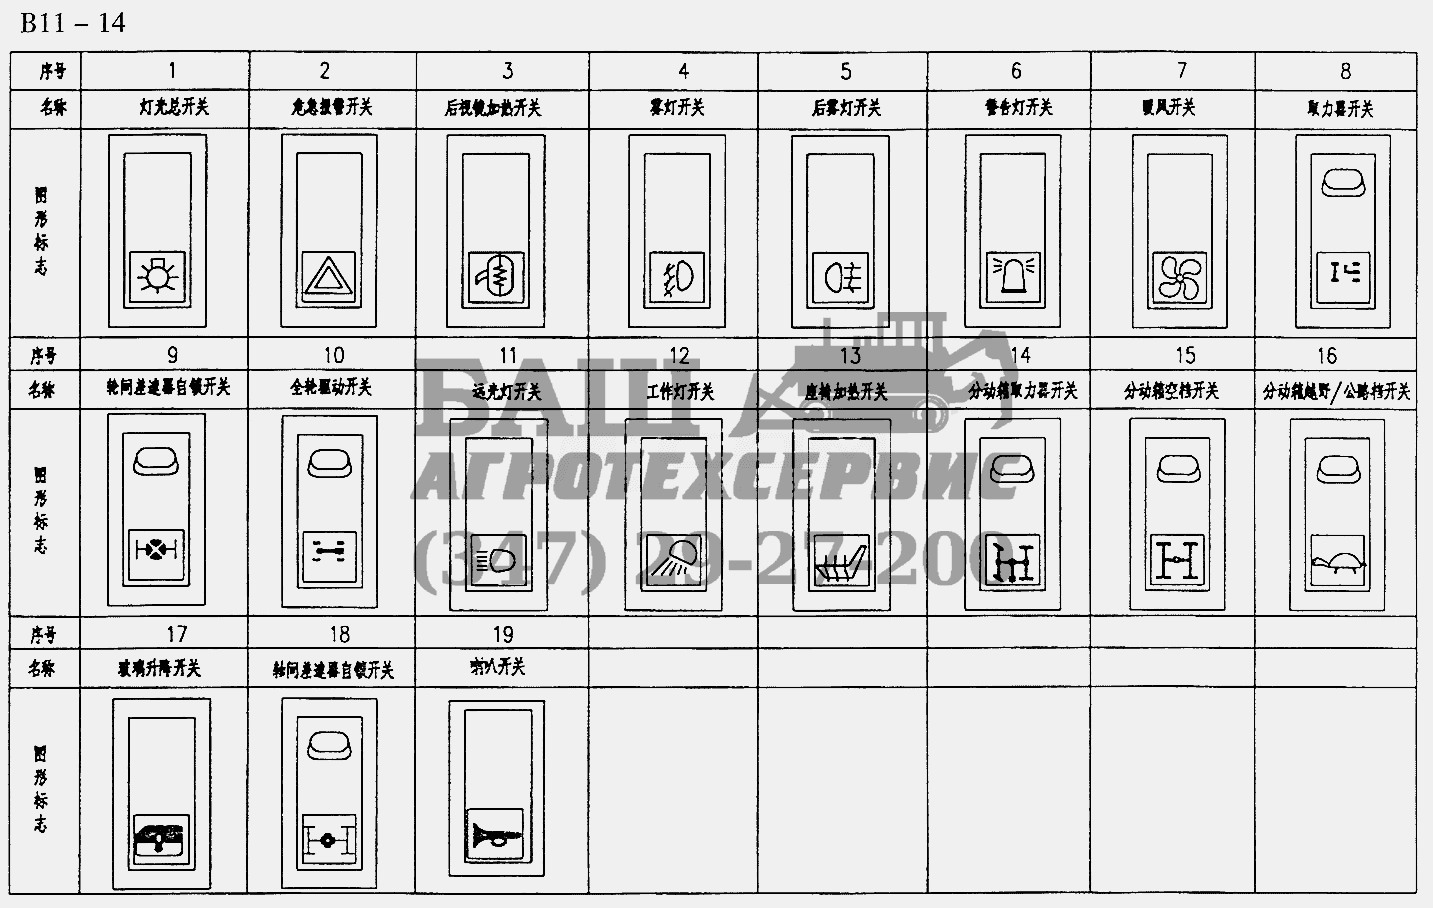 SWITCHS FOR 7001 TYPE ELECTRICAL SYSTEM (B11-14) Sinotruk 4x2 Tractor (371)